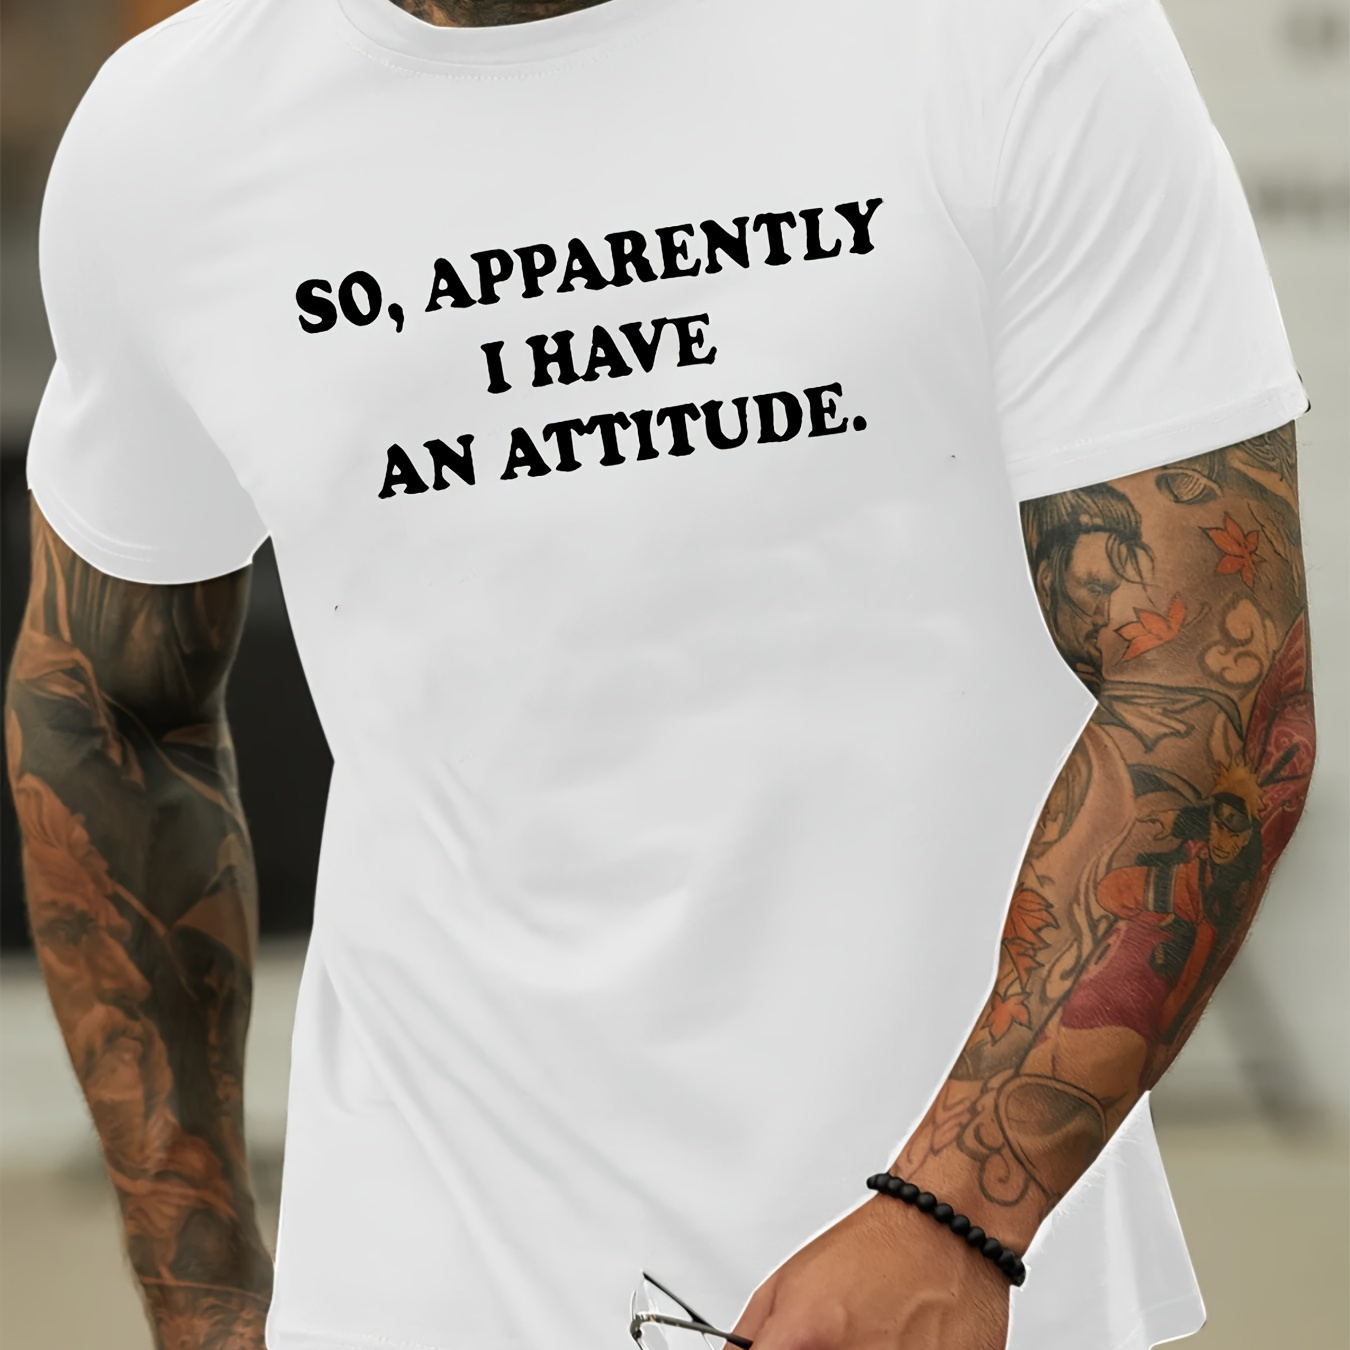 

So What Apparently I Have An Attitude Print Men's Round Neck Short Sleeve Tee Fashion Regular Fit T-shirt Top For Spring Summer Holiday